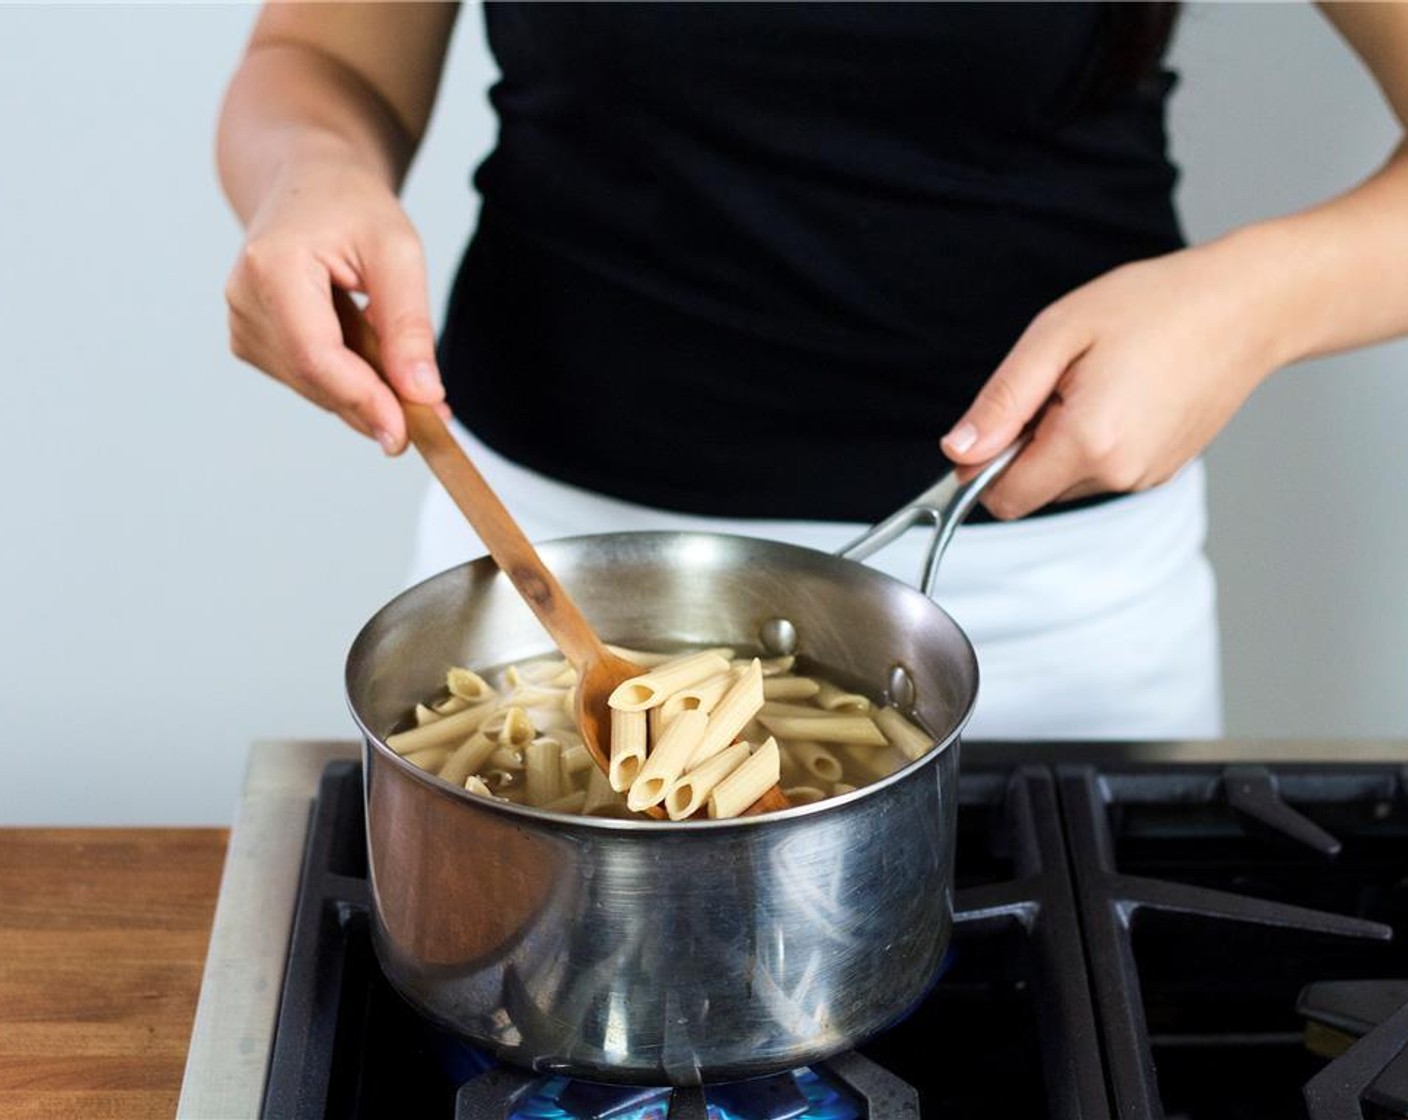 step 5 Once the water has started to boil, add  Whole Grain Penne (1 cup) and stir. Cook for 9 minutes, or until desired texture. Drain the pasta in a colander and reserve a quarter cup of the pasta water, and set aside.